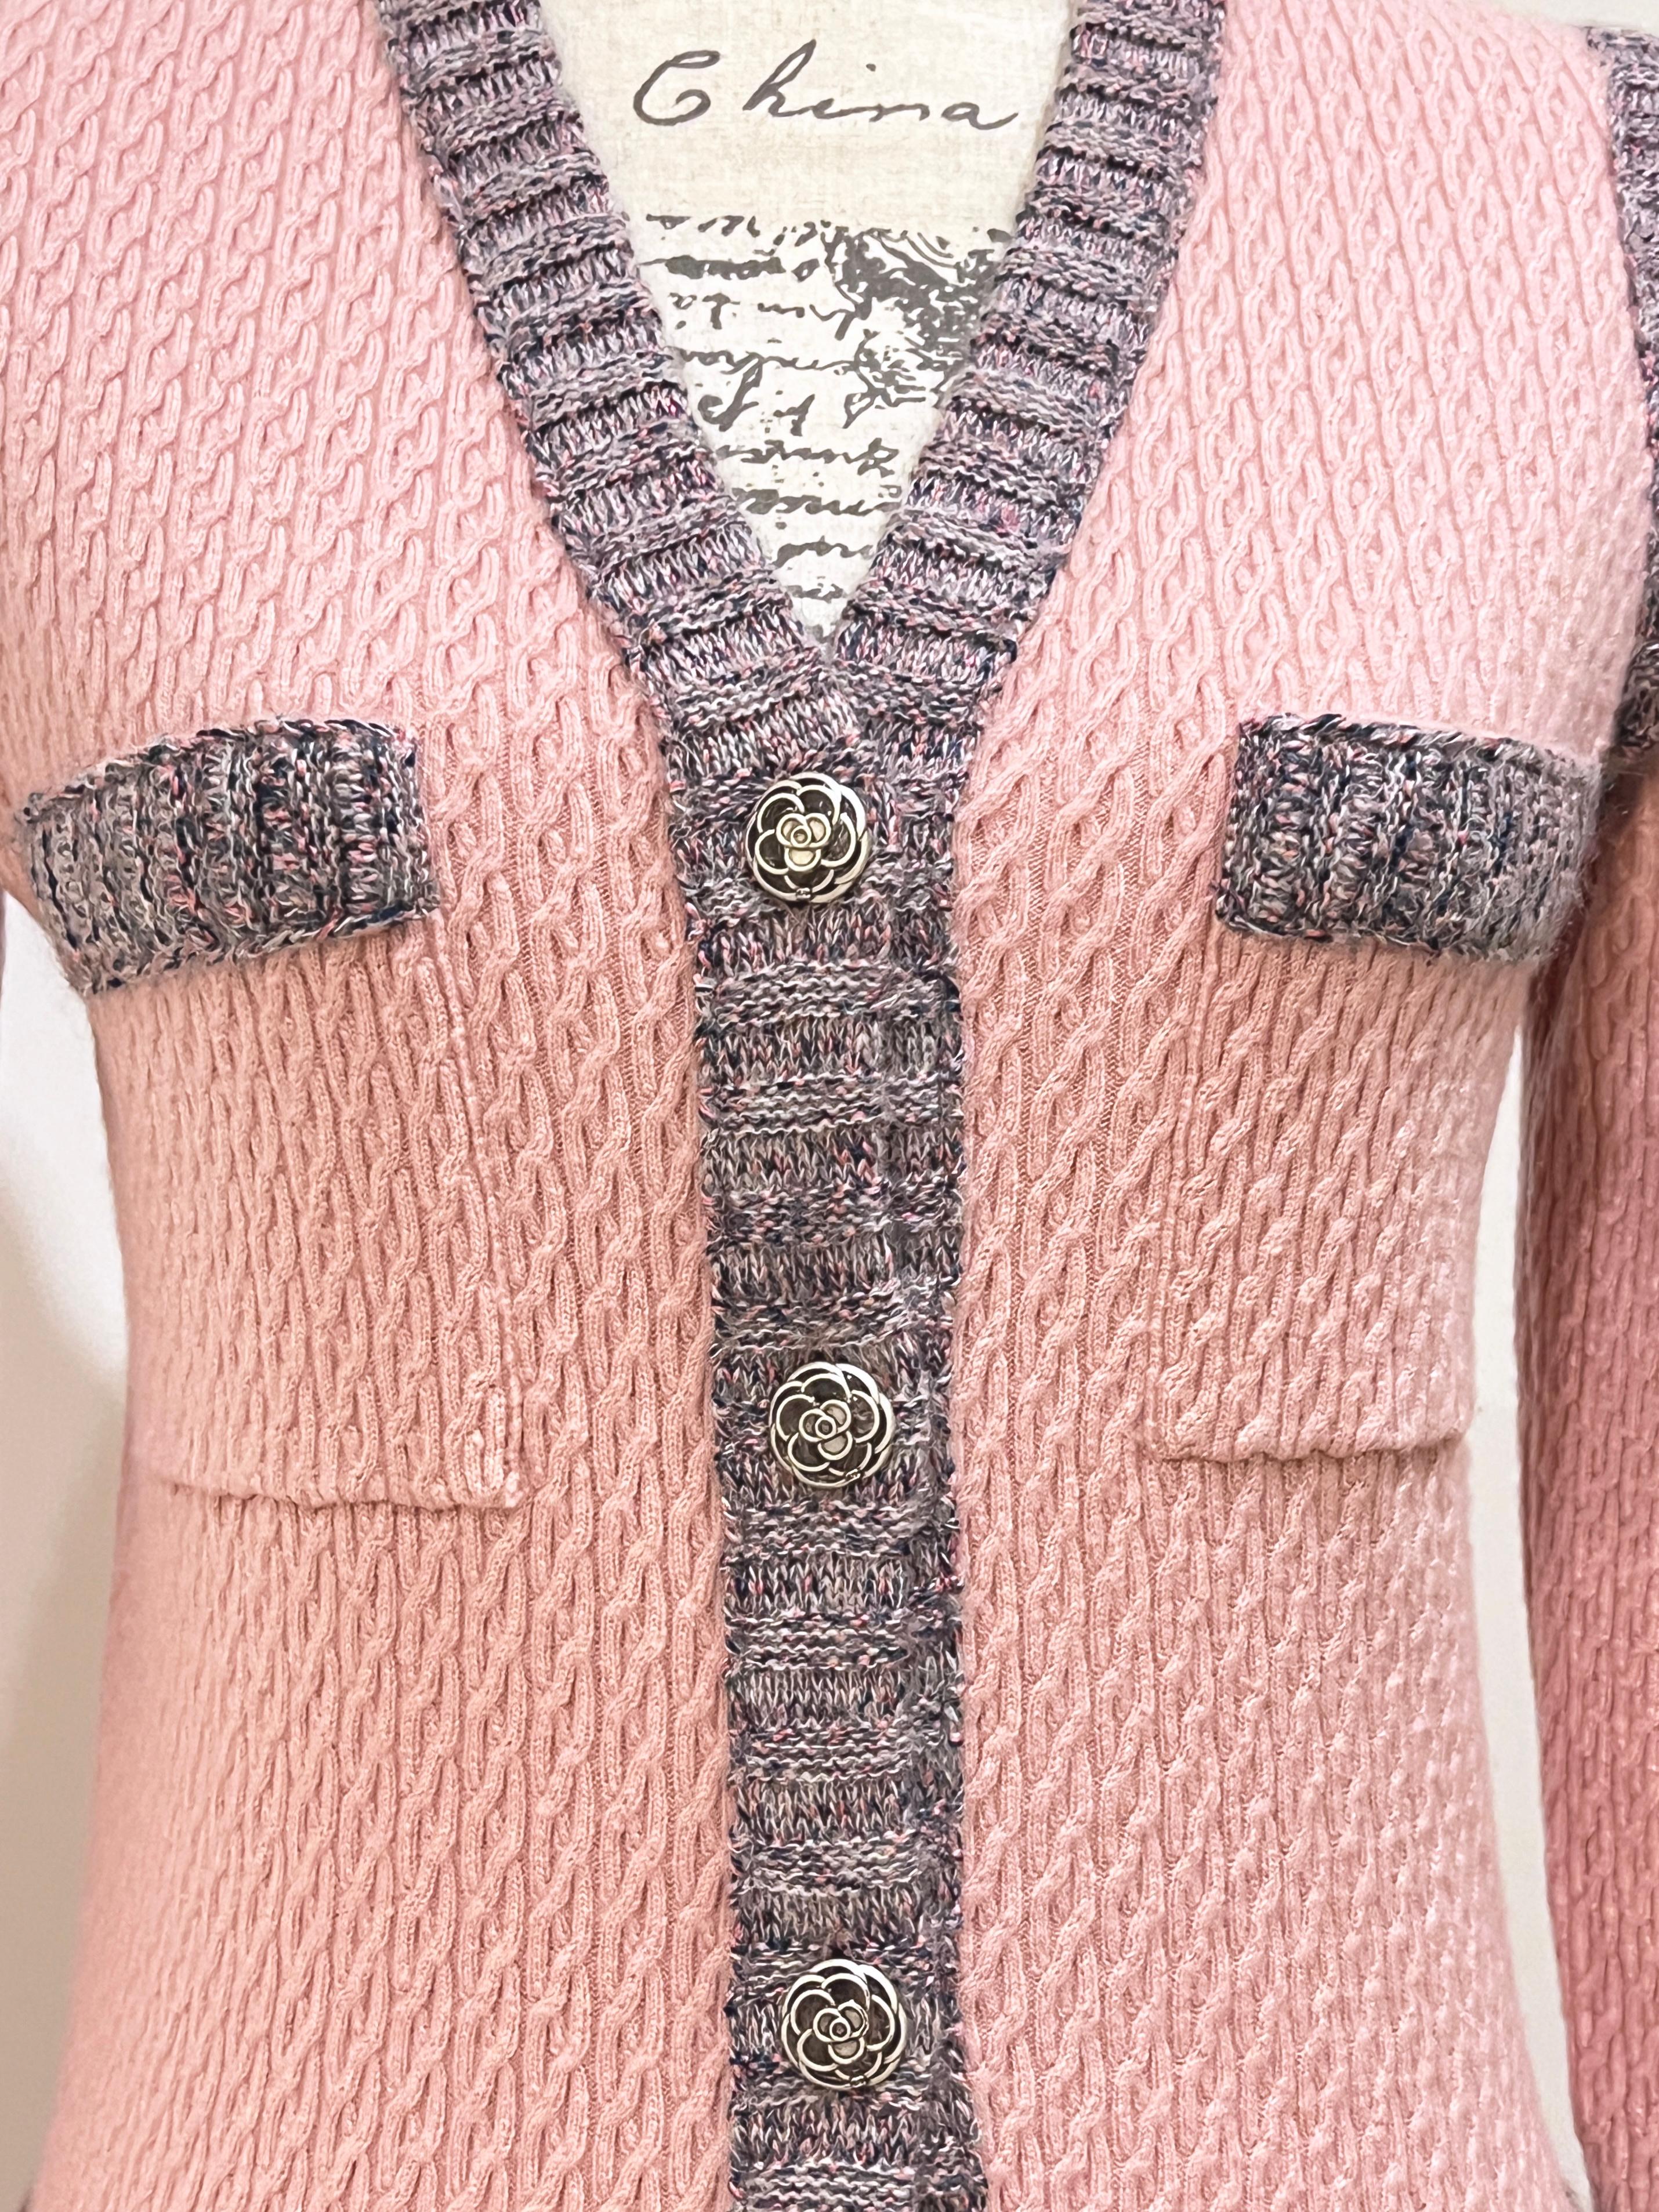 Chanel Iconic Coco Brasserie Quilted Jacket Dress For Sale 11